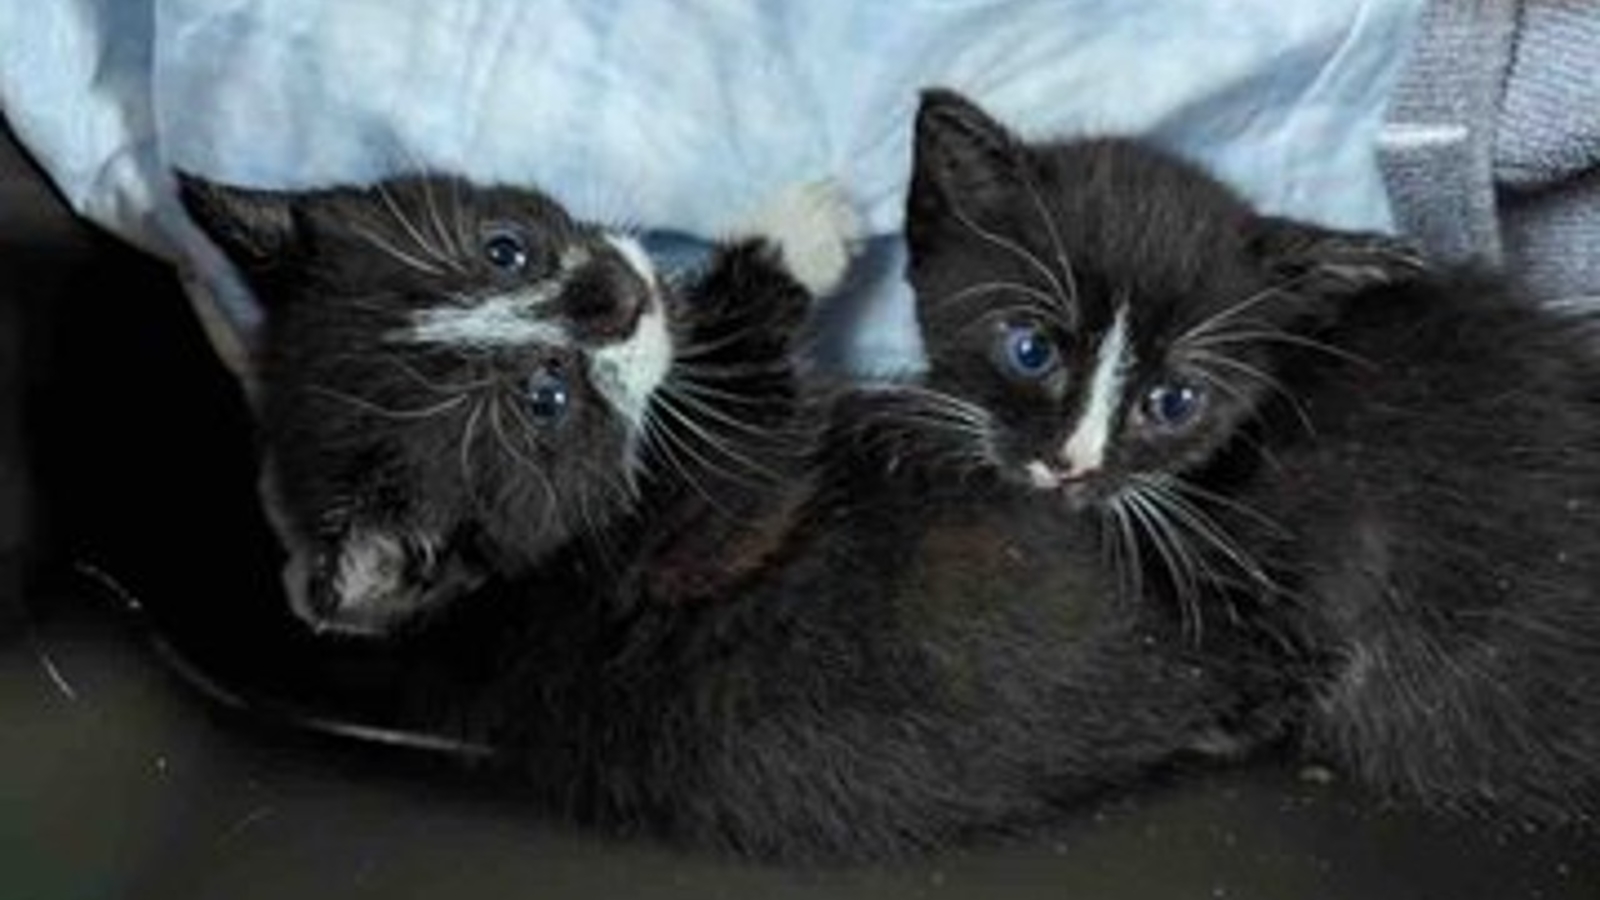 NYPD officers rescue 2 kittens from construction site